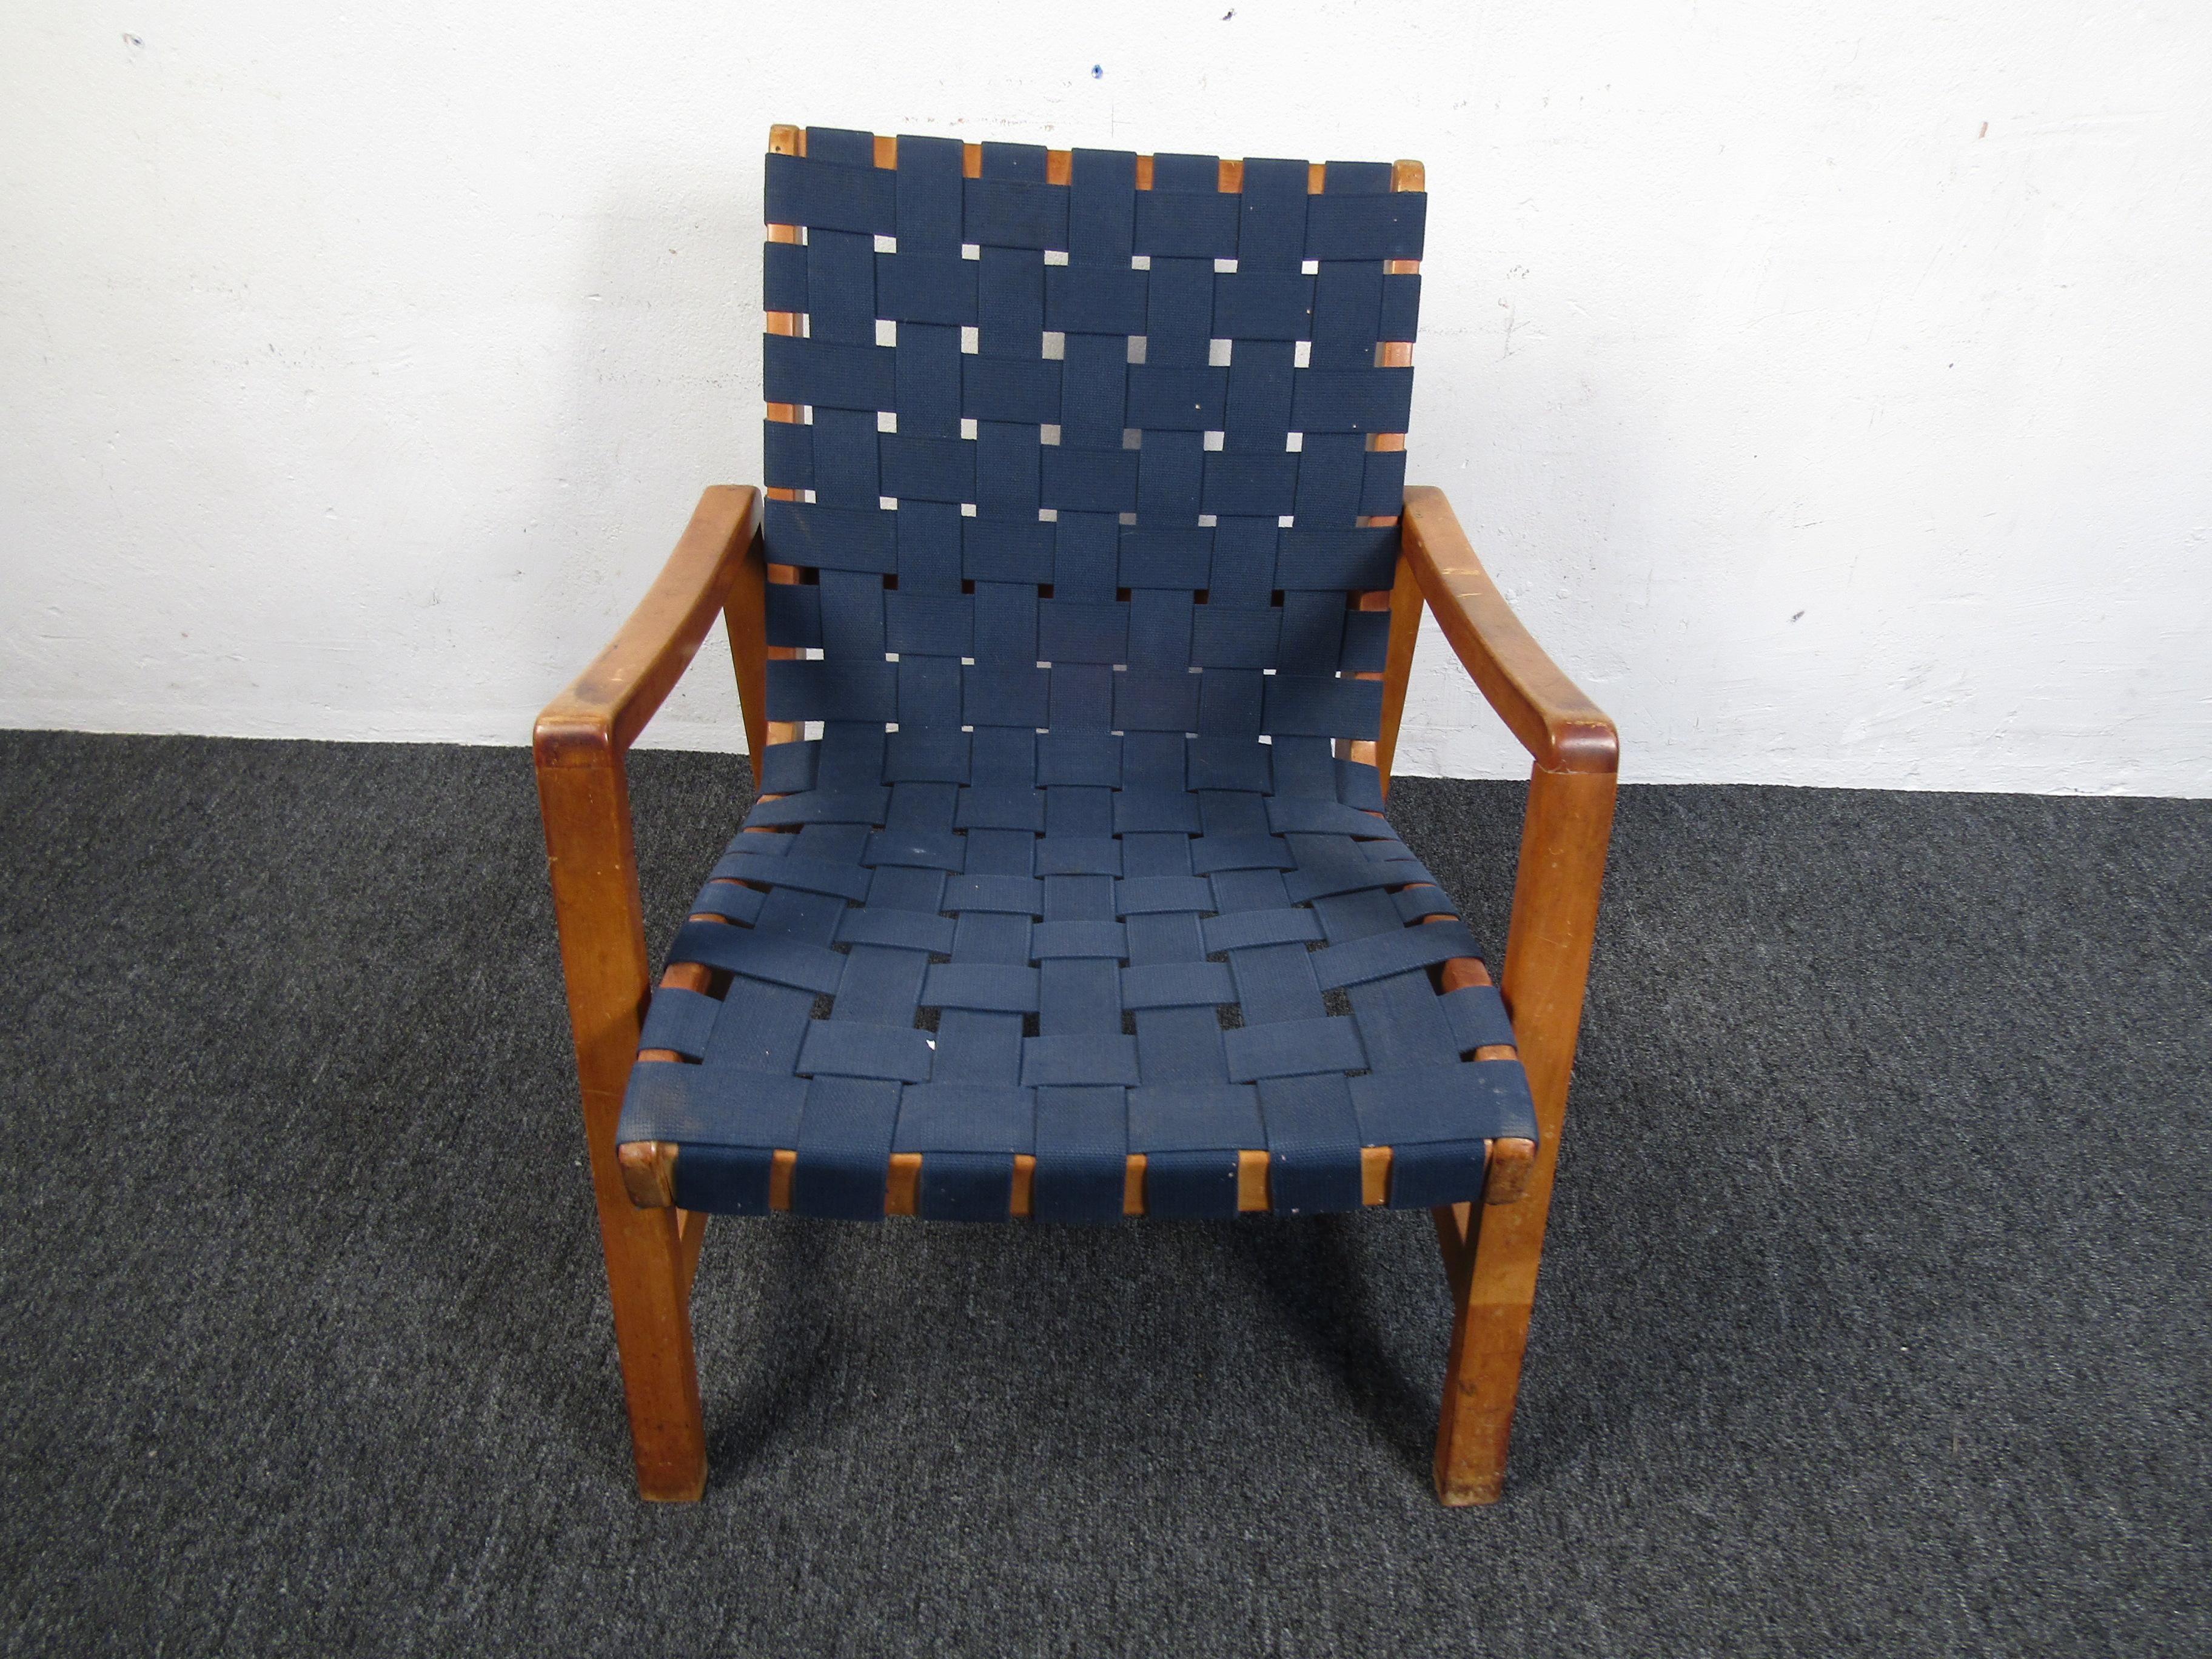 Stylish vintage strap chair. Interestingly contoured wooden frame. Please confirm item location with dealer (NJ or NY).